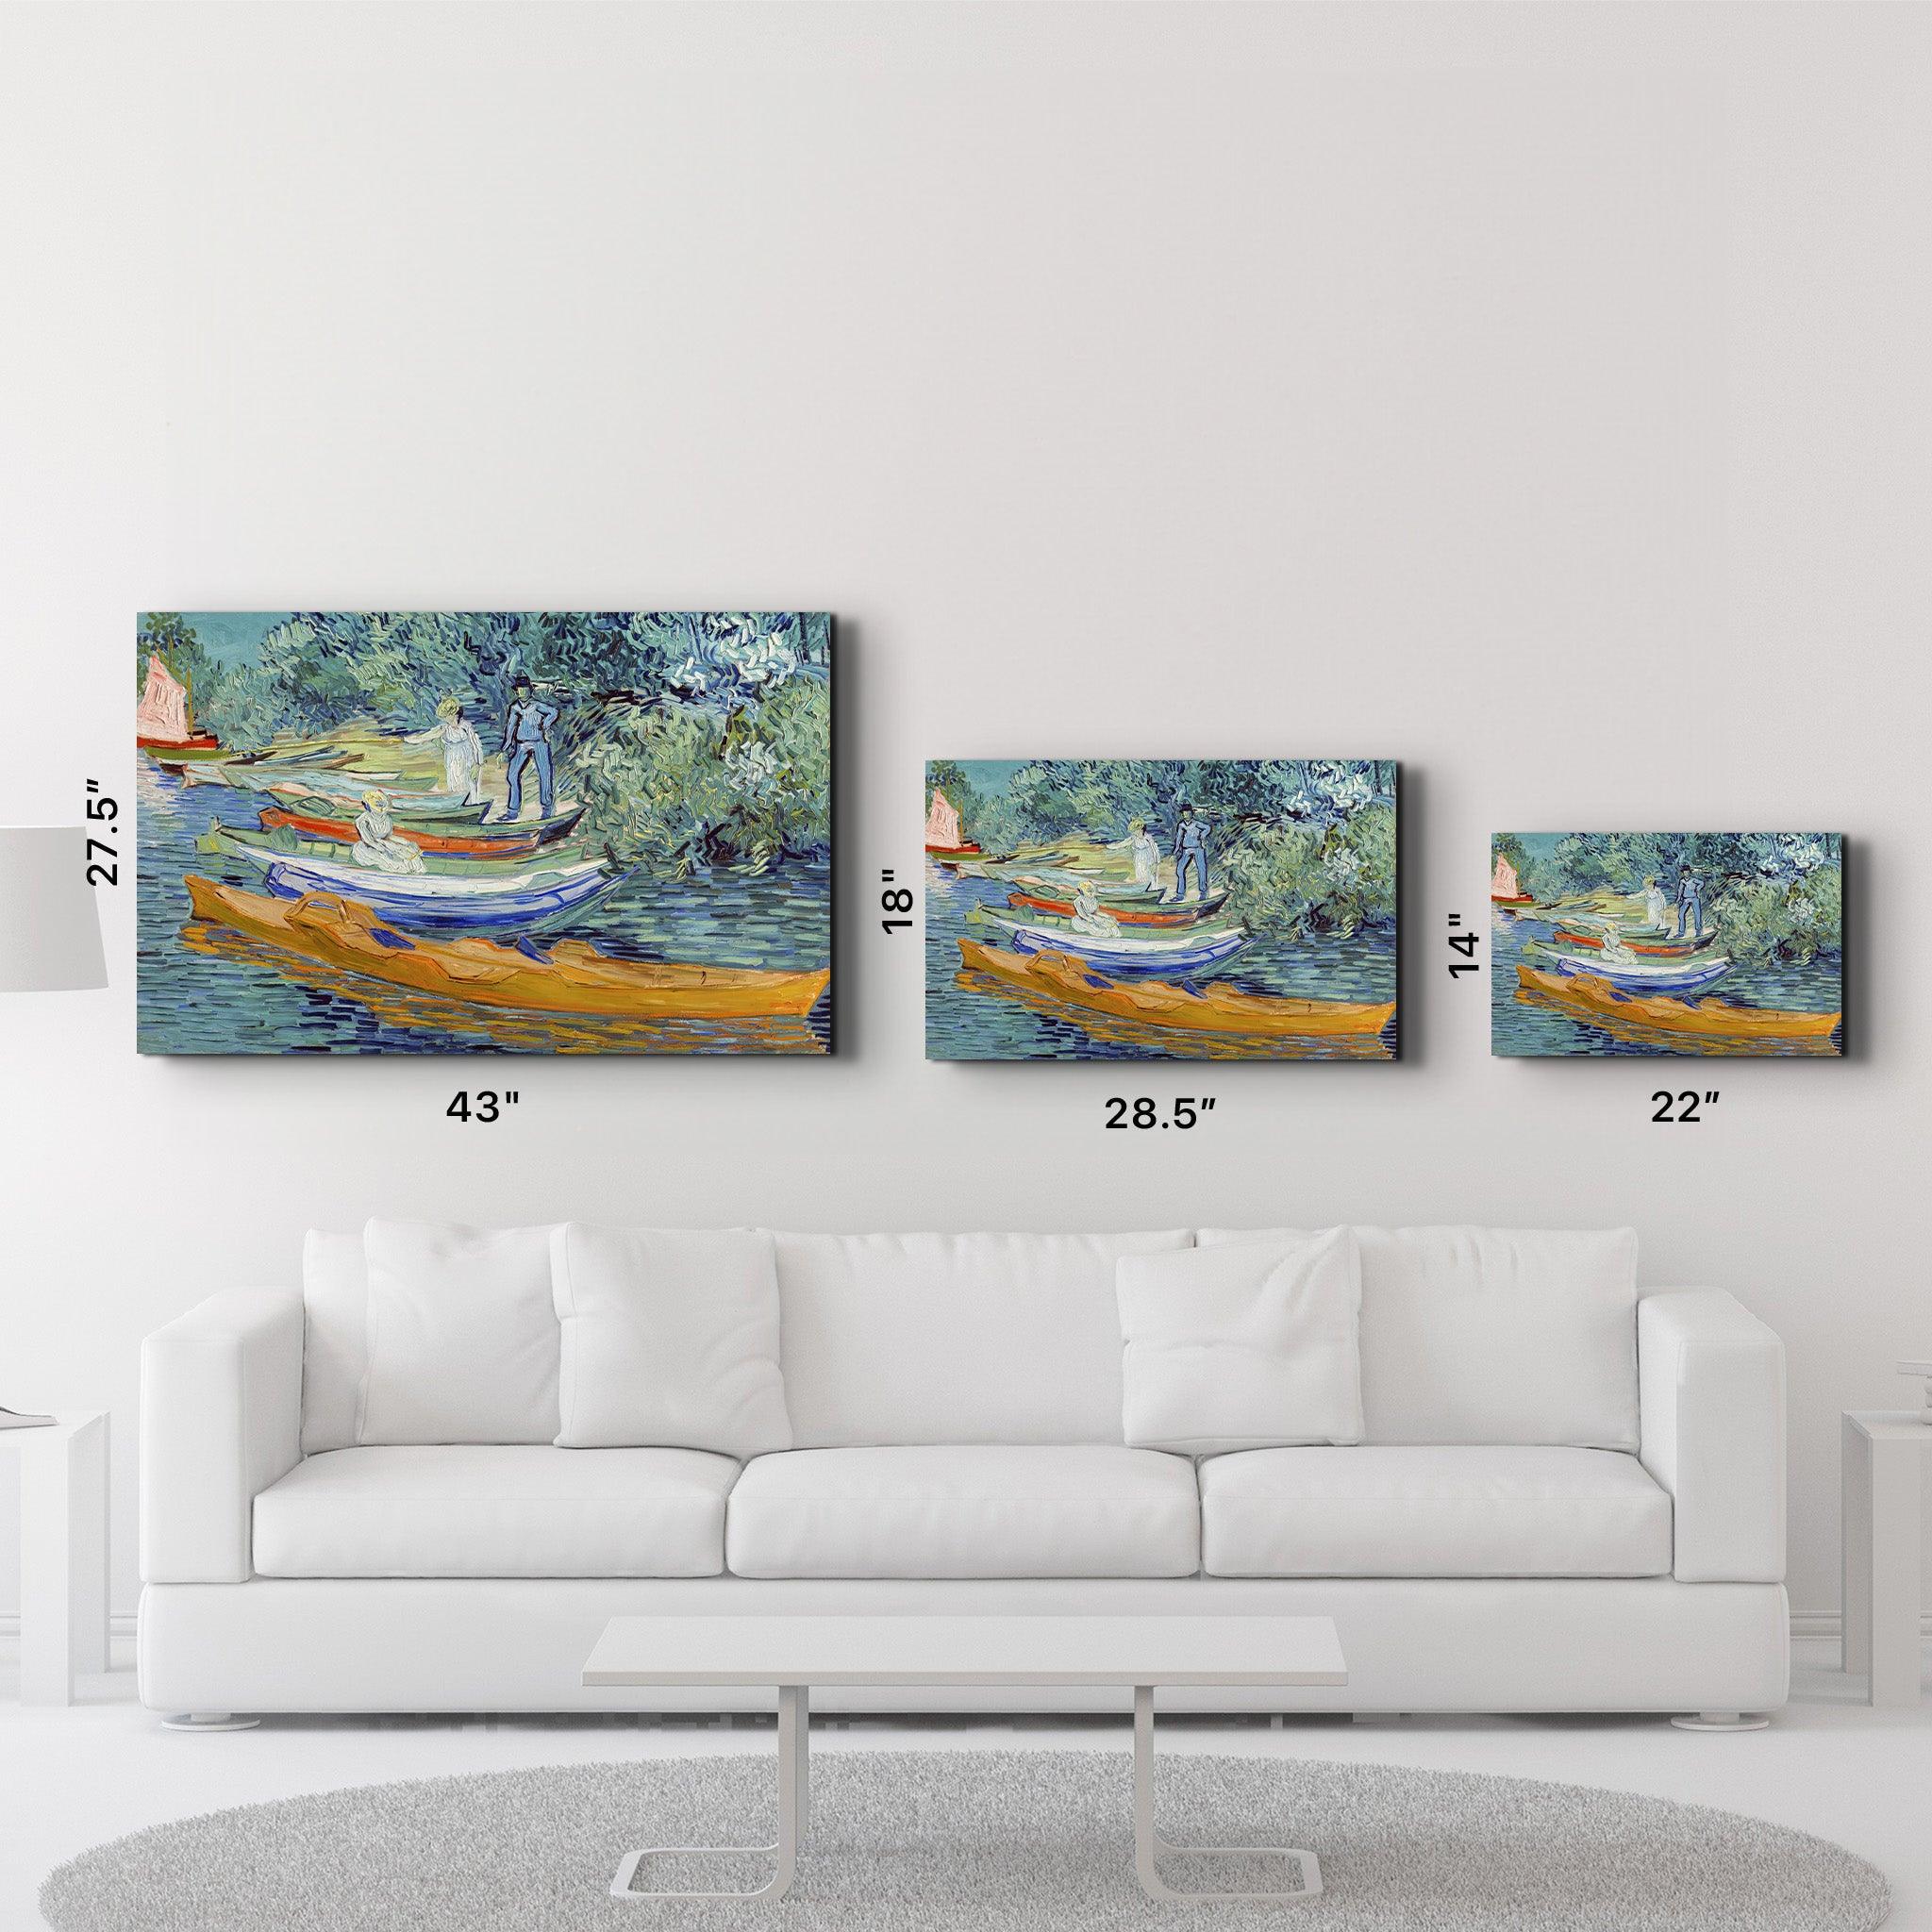 Vincent van Gogh's Bank of the Oise at Auvers (1890) | Glass Wall Art - ArtDesigna Glass Printing Wall Art